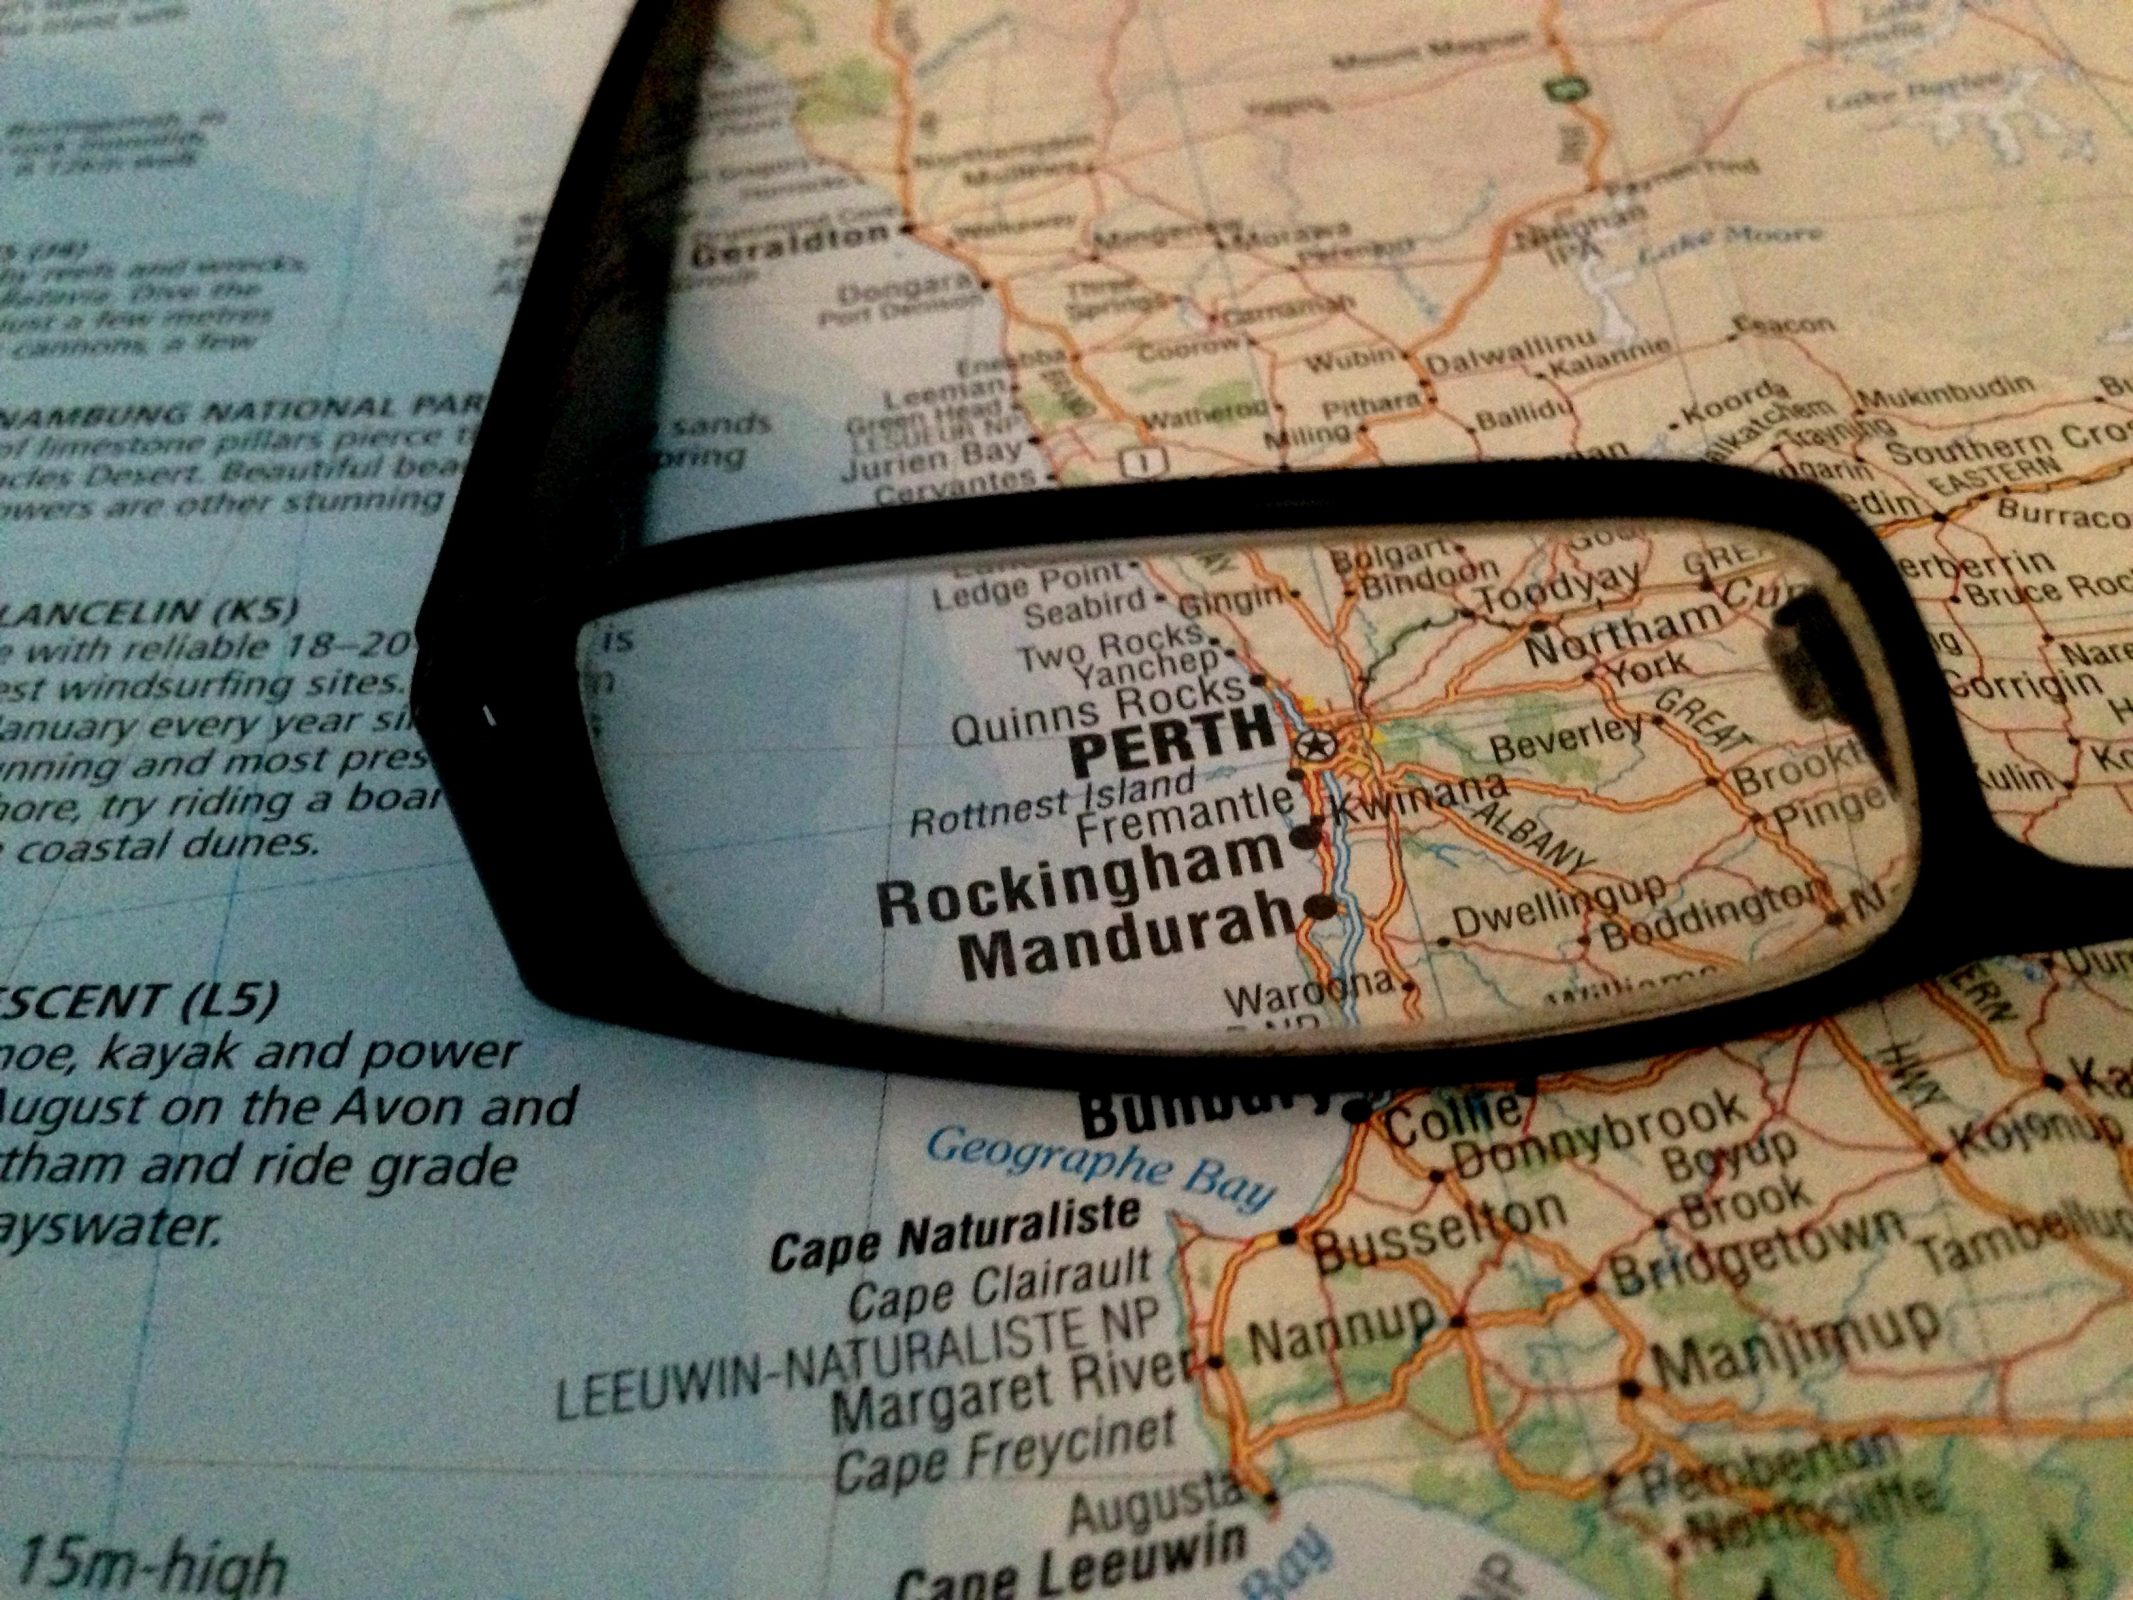 Things to do in Perth, Perth tours, Perth map